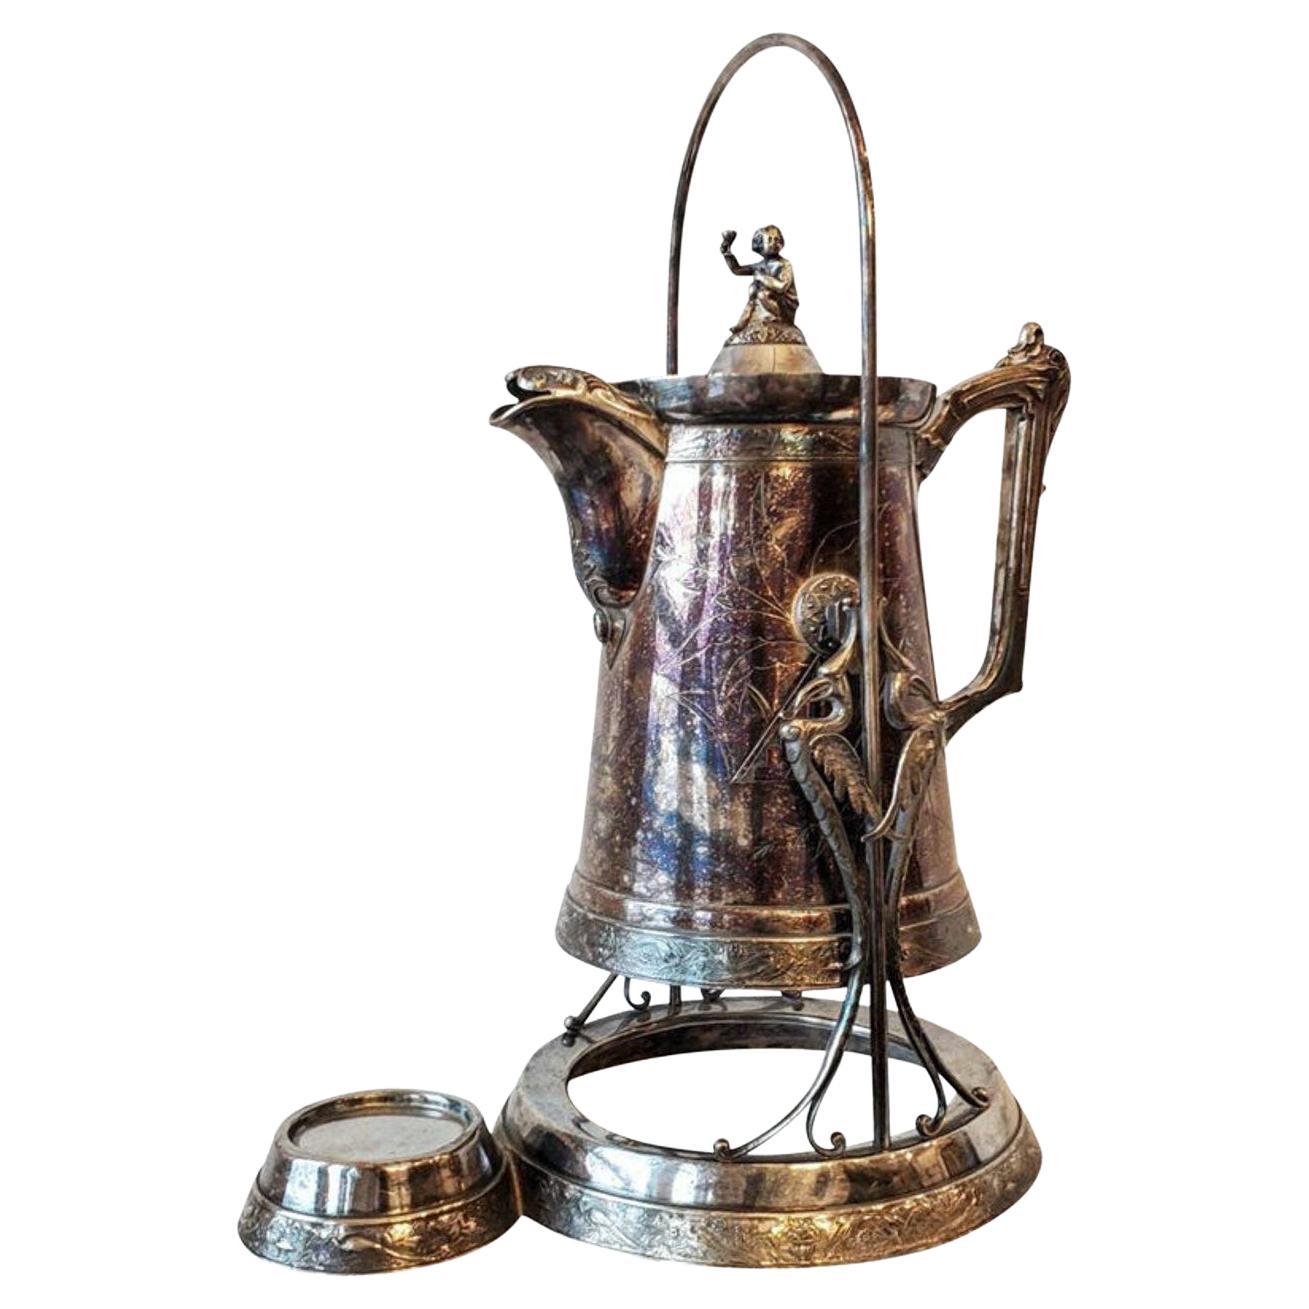 Mid-19th Century American Victorian Silver Plated Pitcher on Stand For Sale